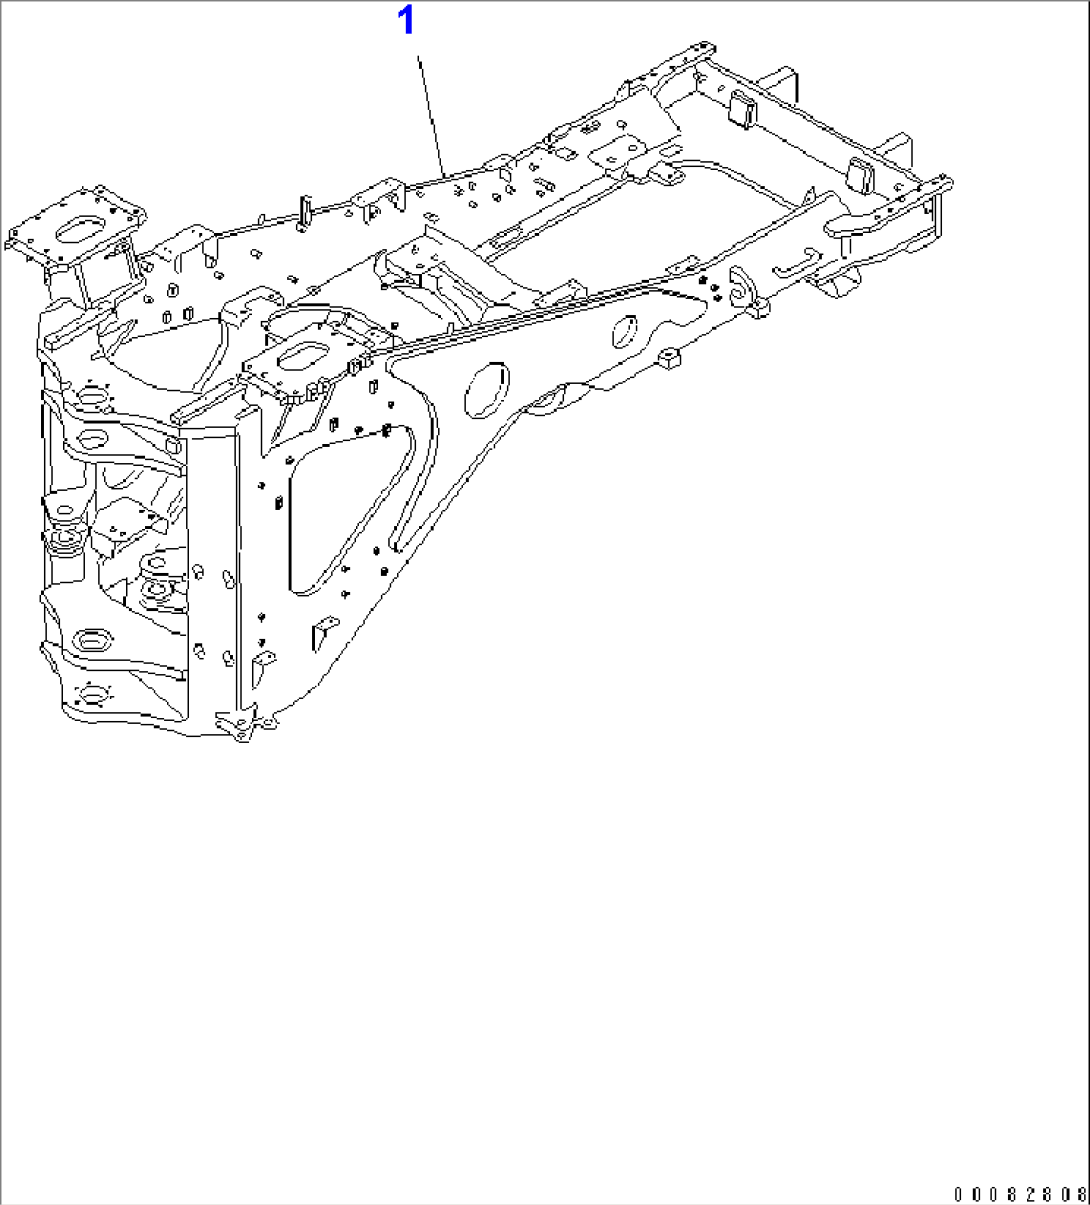 REAR FRAME (WITH HYDRAULIC QUICK COUPLER)(#50001-.)